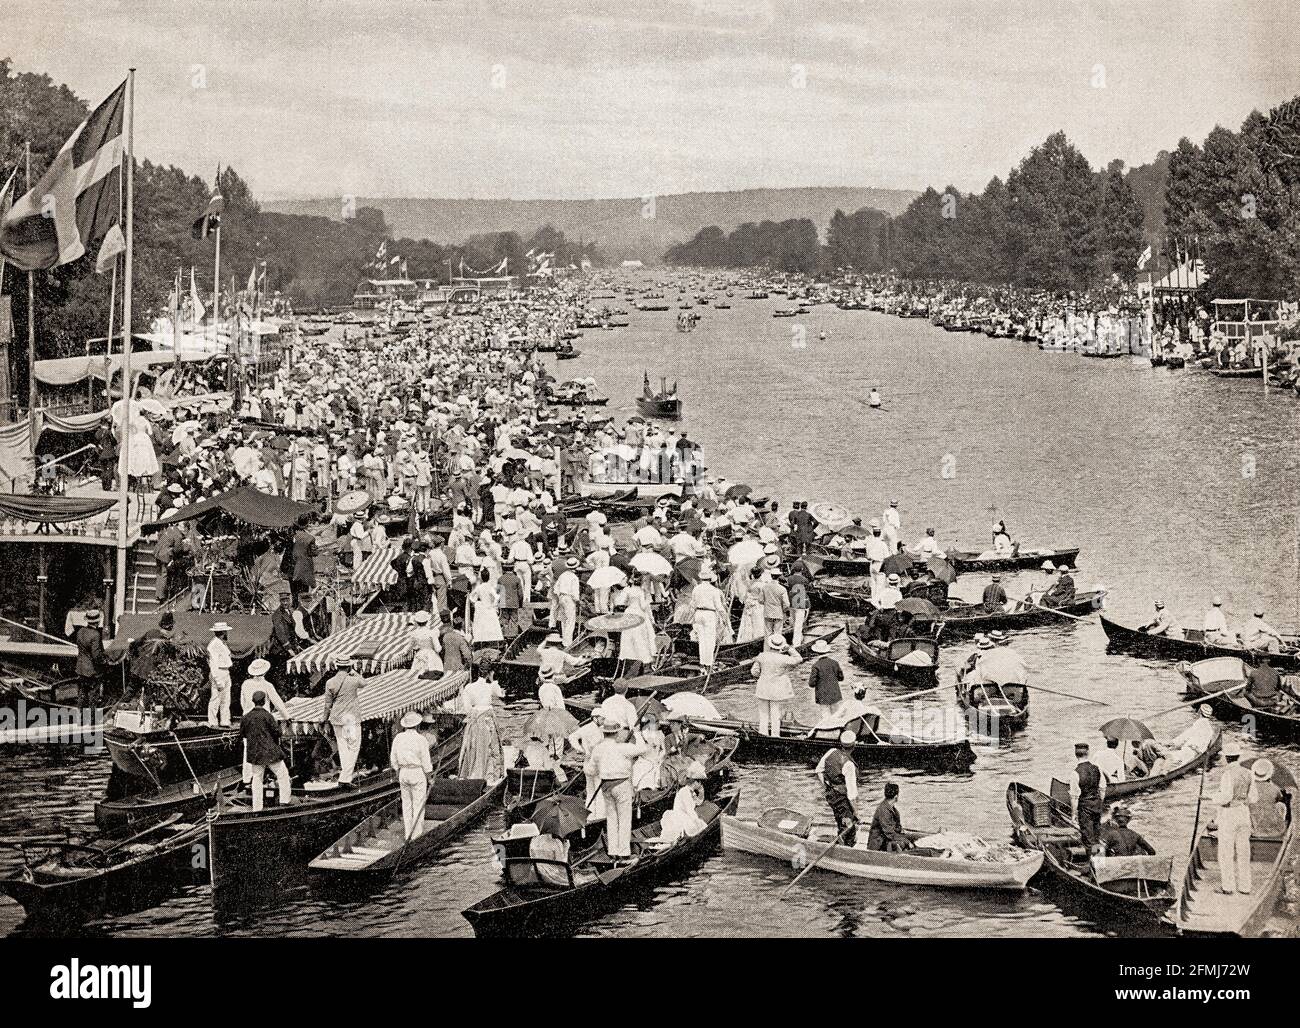 A late 19th Century view of many spectators lining the sides of the River Thames during Henley Royal Regatta (or Henley Regatta, its original name pre-dating Royal patronage), a rowing event held annually on the river at  the town of Henley-on-Thames, Oxfordshire, England. It was established on 26 March 1839, and became 'Royal' in 1851, when Prince Albert became patron of the regatta. Stock Photo